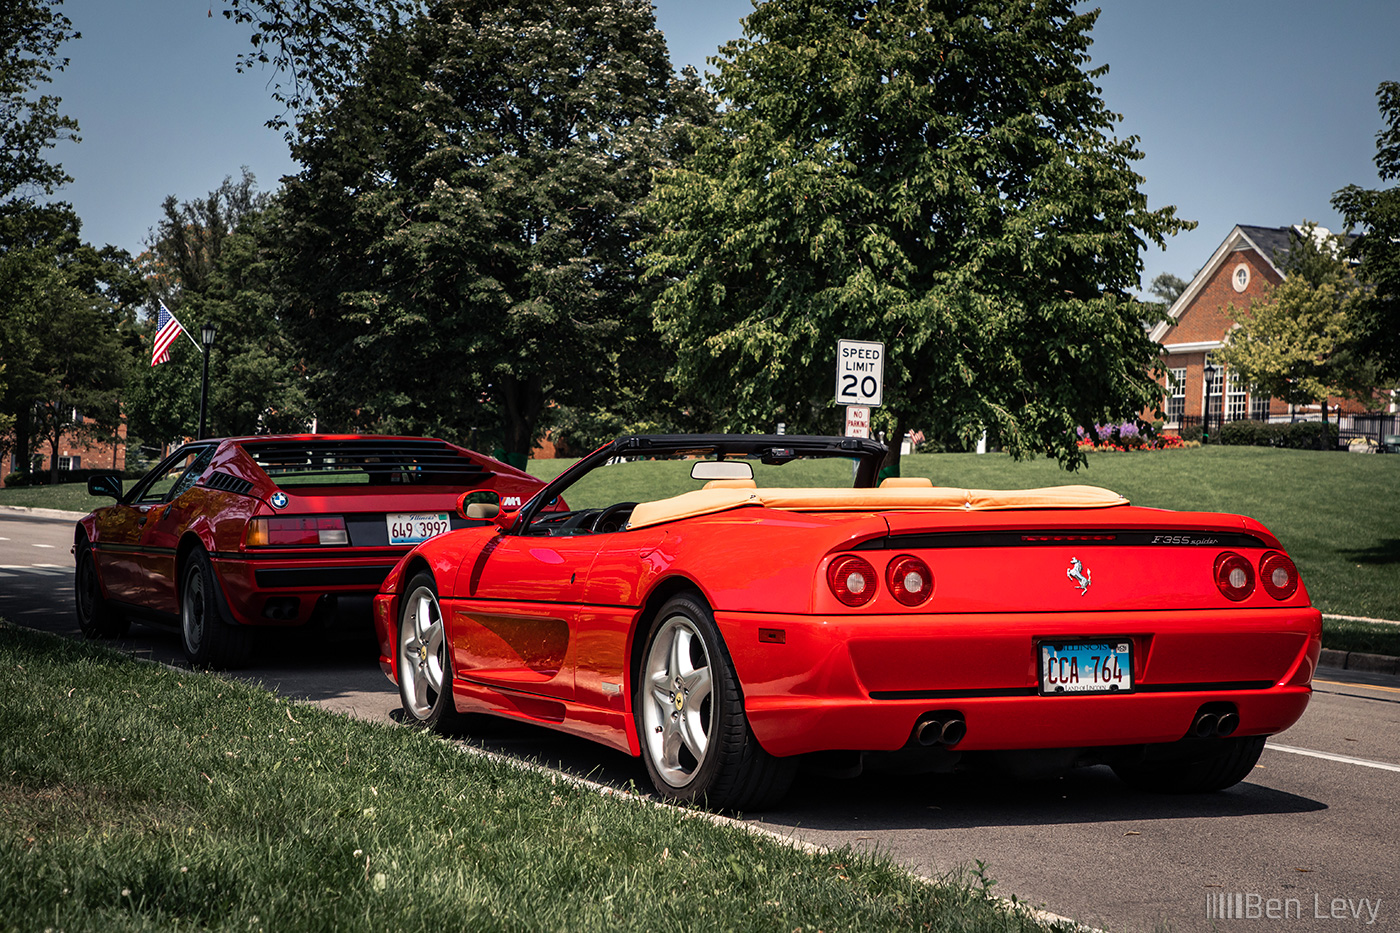 Red BMW M1 and Ferrari F355 Spider at Fuelfed Coffee & Classics in Hinsdale